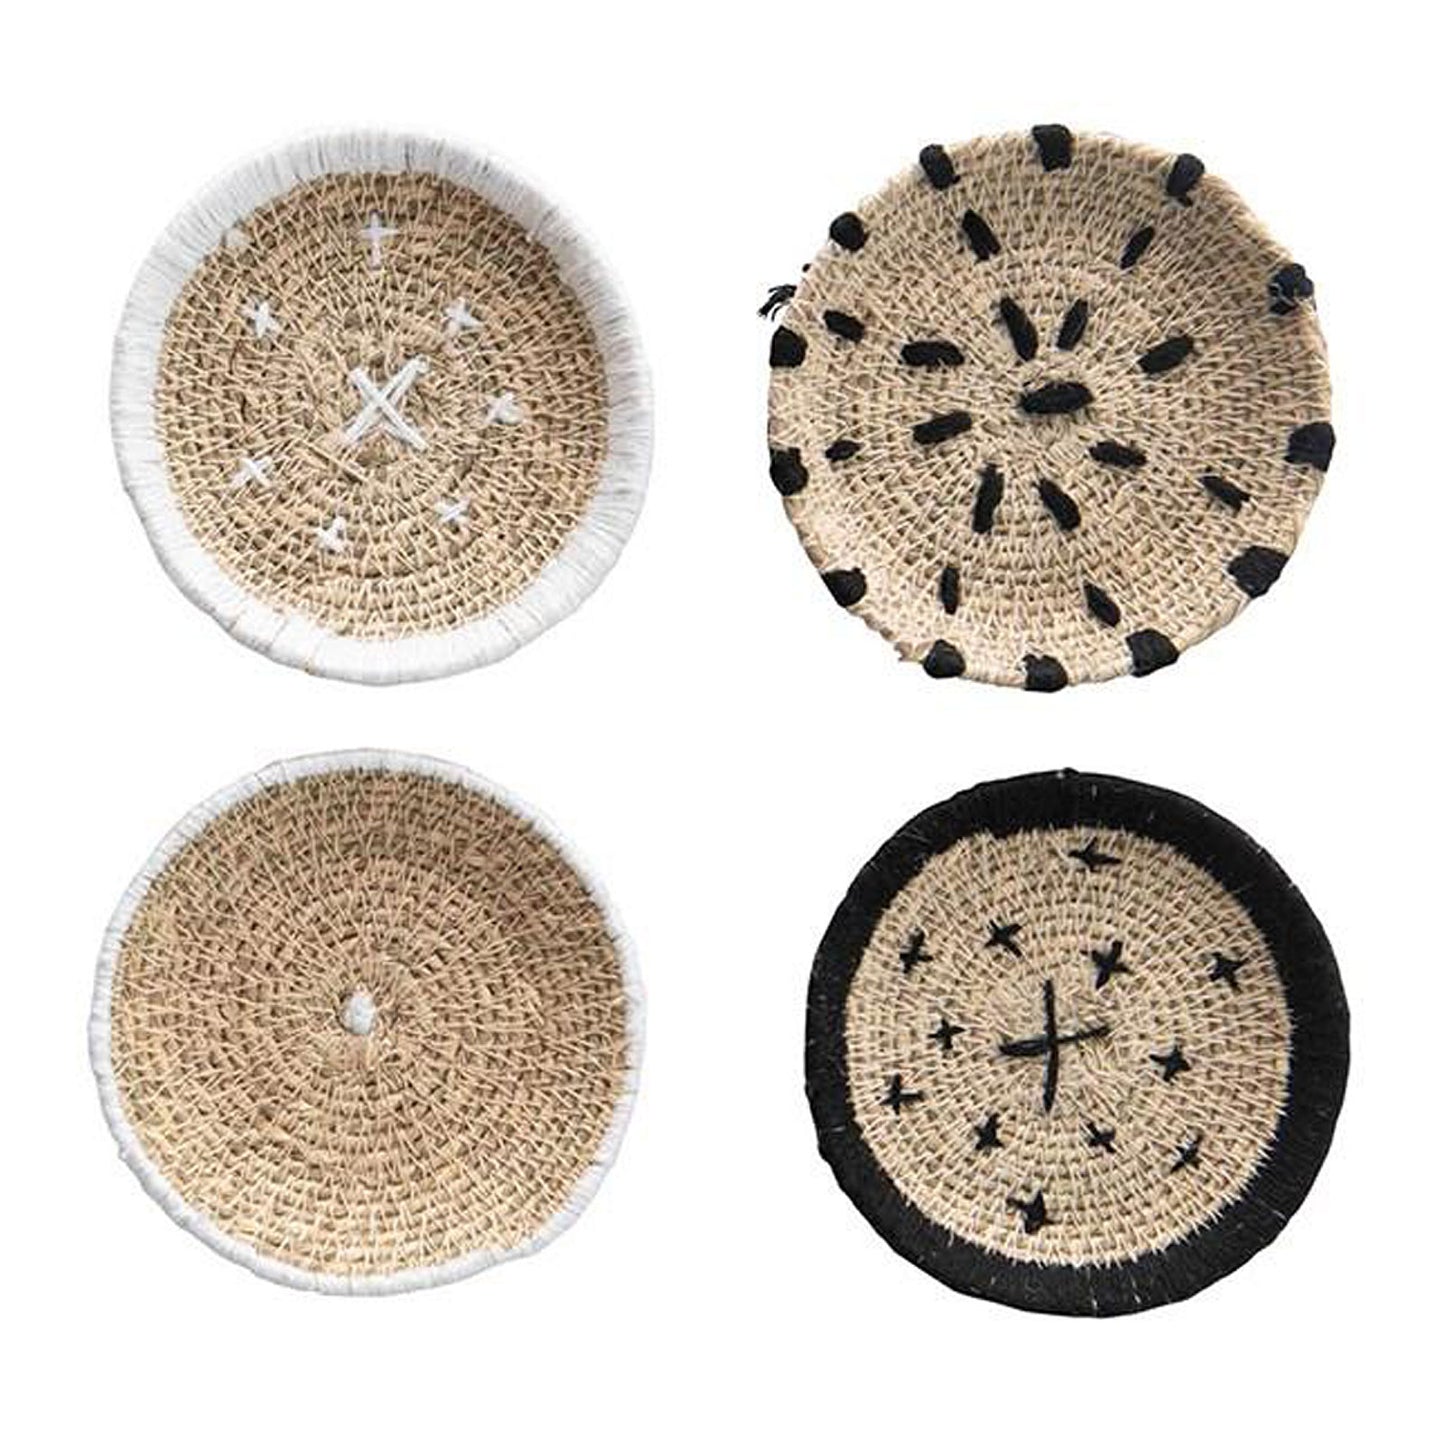 Round Handwoven Natural Seagrass Coasters, Set of 4